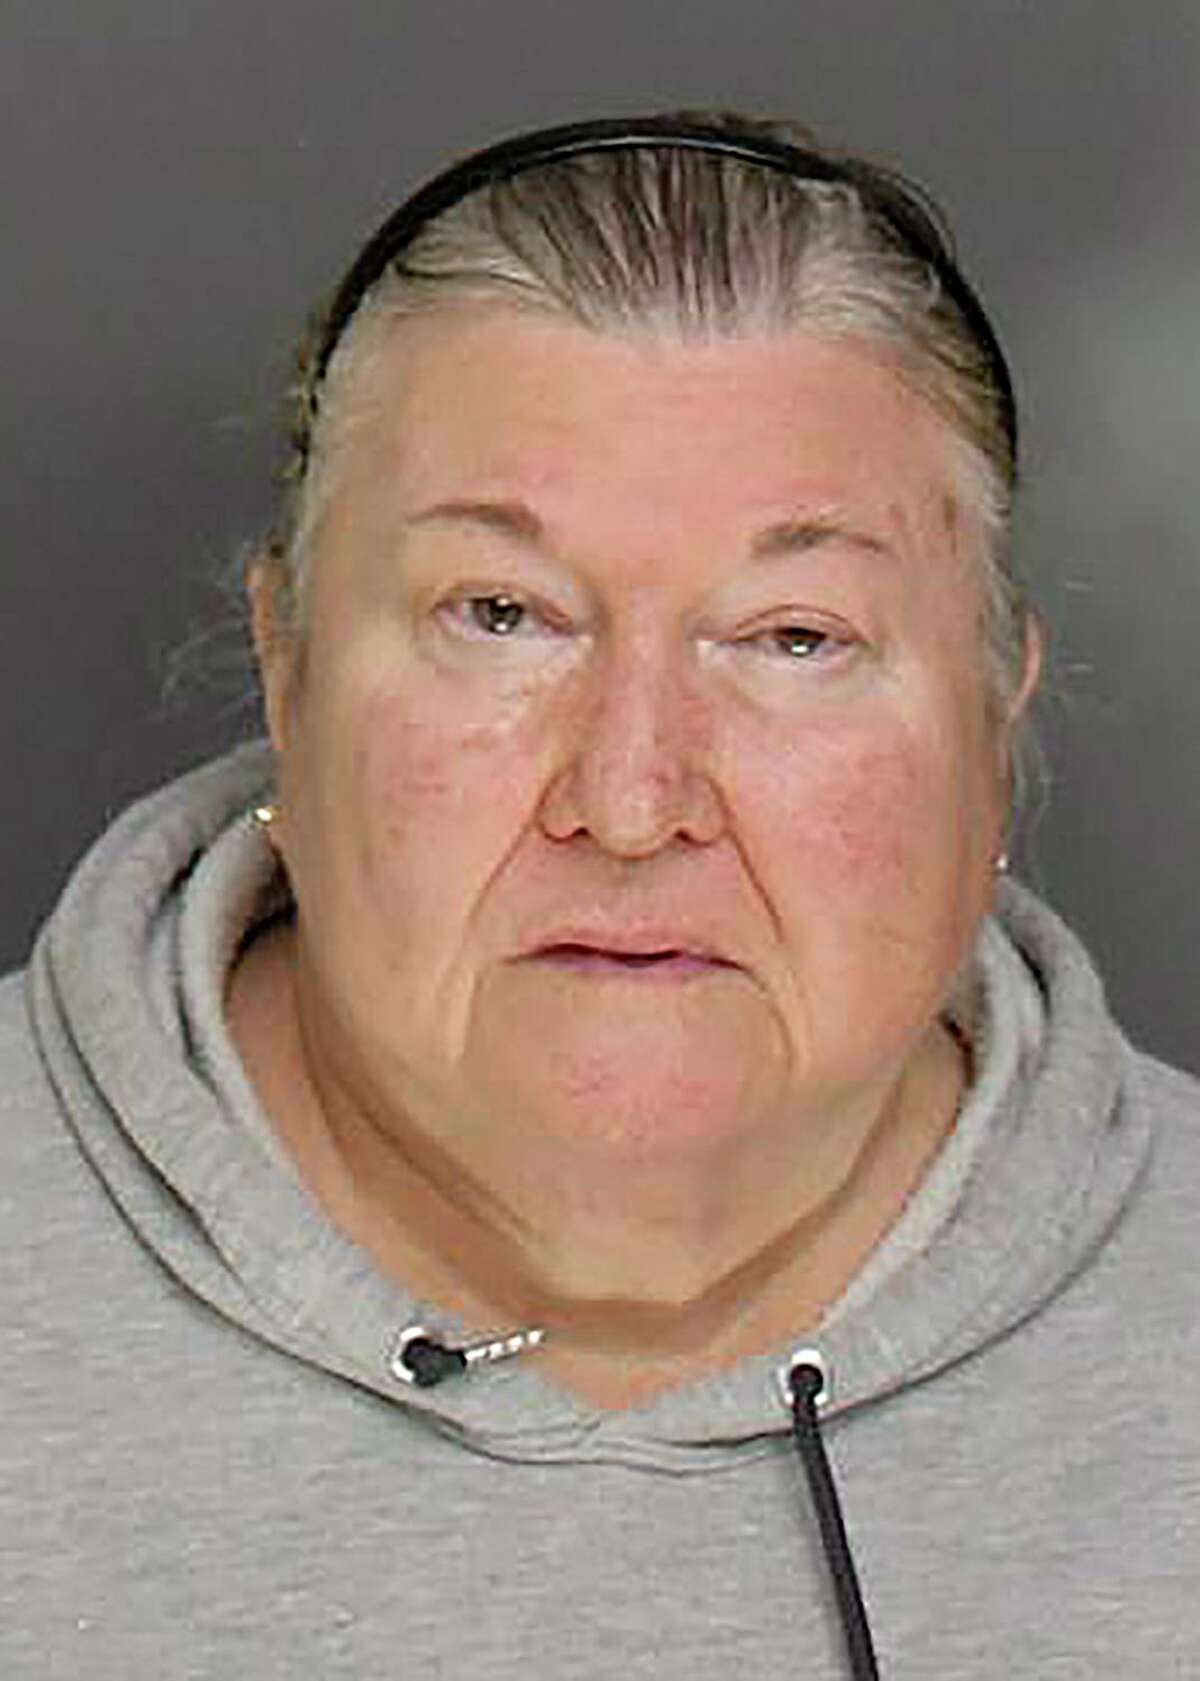 Dale LaPrade, a former caretaker of Park Cemetery in Bridgeport, is facing criminal charges.